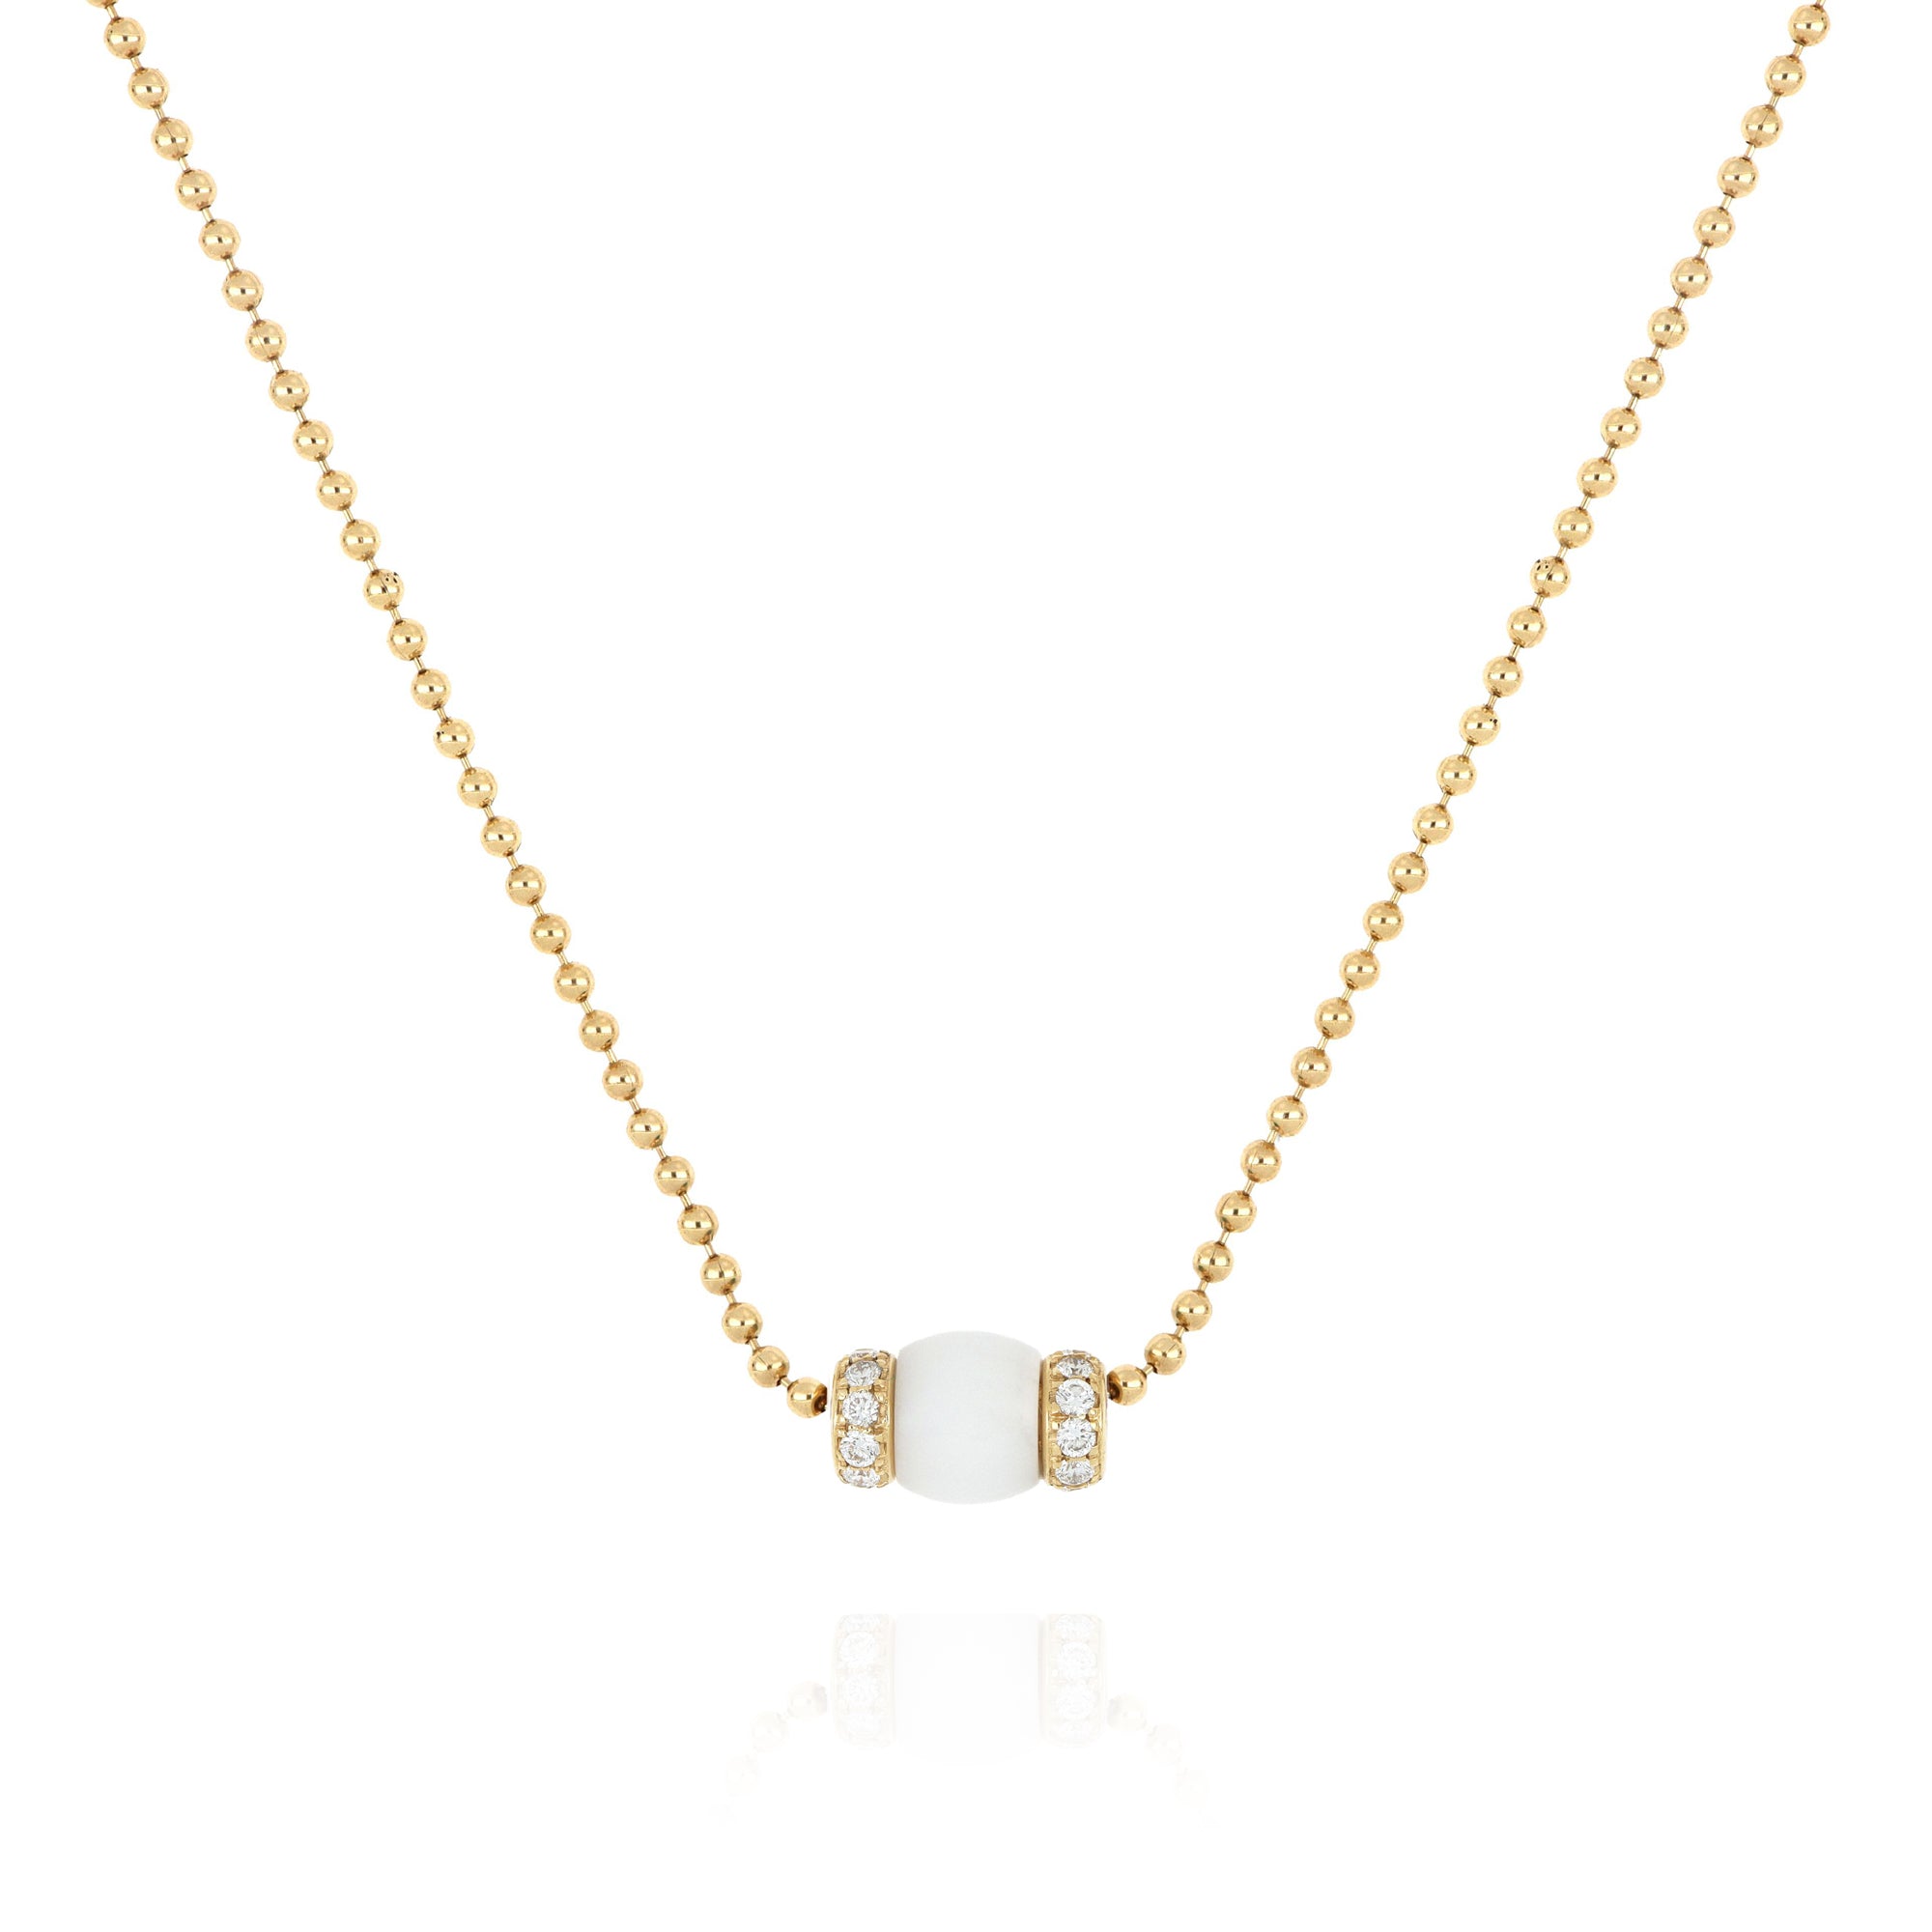 Video - Le Carrousel Necklace Howlite and Diamonds